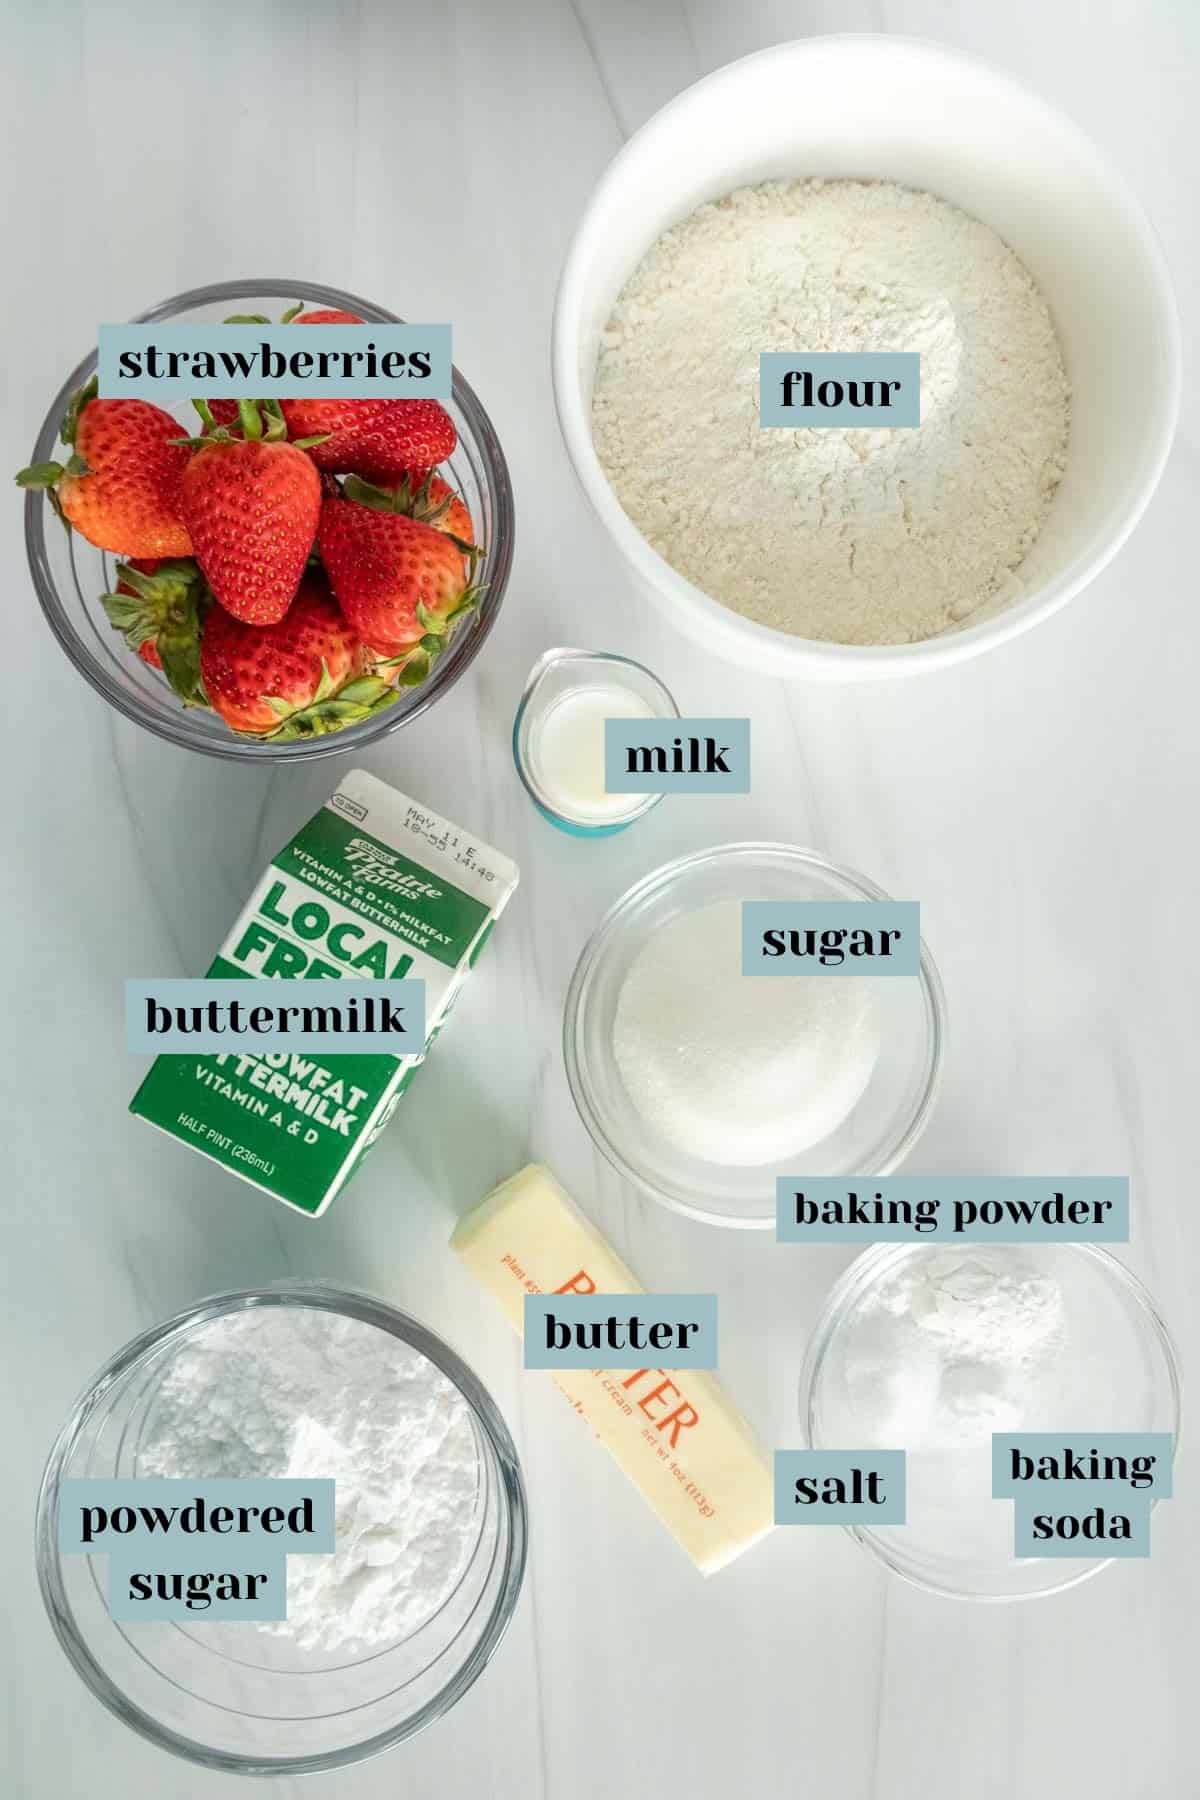 Ingredients for baking laid out on a white surface, including strawberries, flour, milk, sugar, buttermilk, butter, baking powder, baking soda, powdered sugar, and salt, labeled for identification.